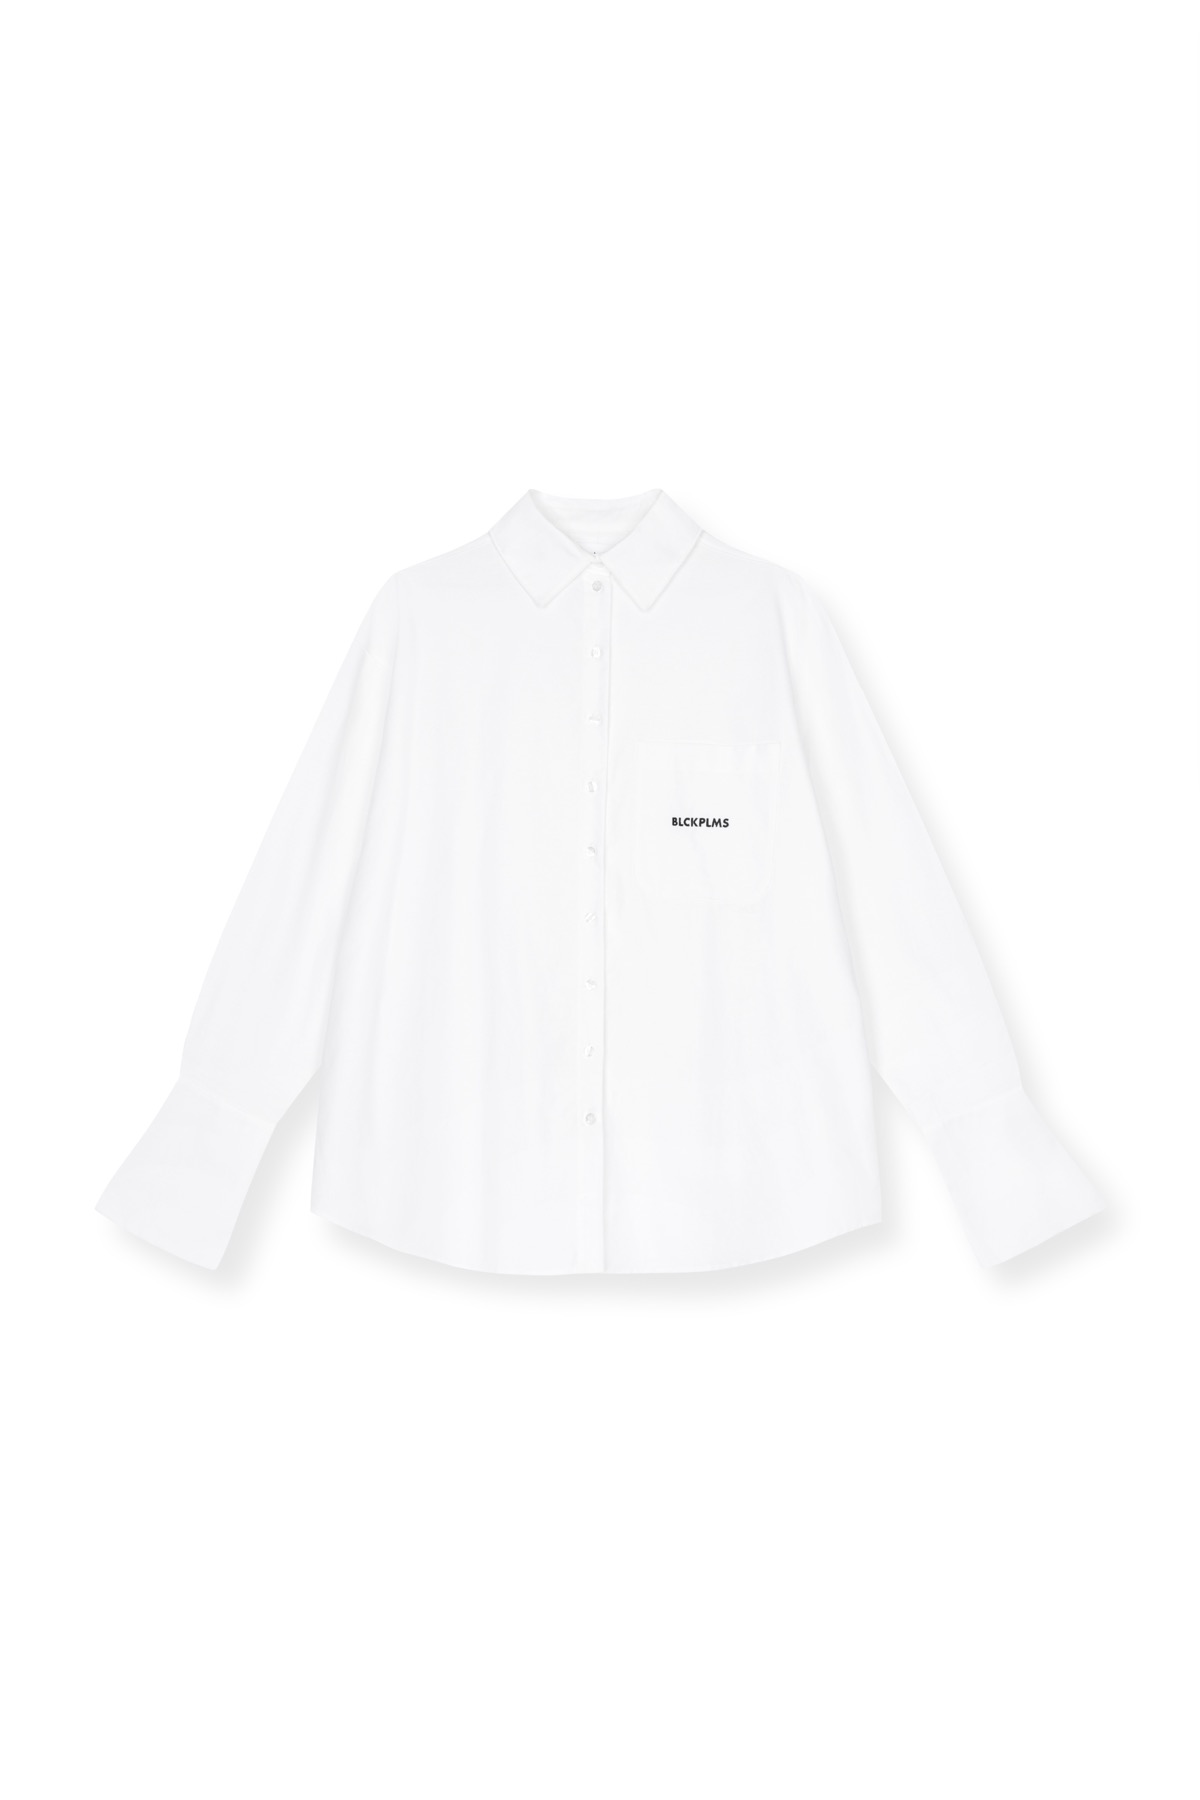 2023_OPEN_WOLLY_Shirt_White